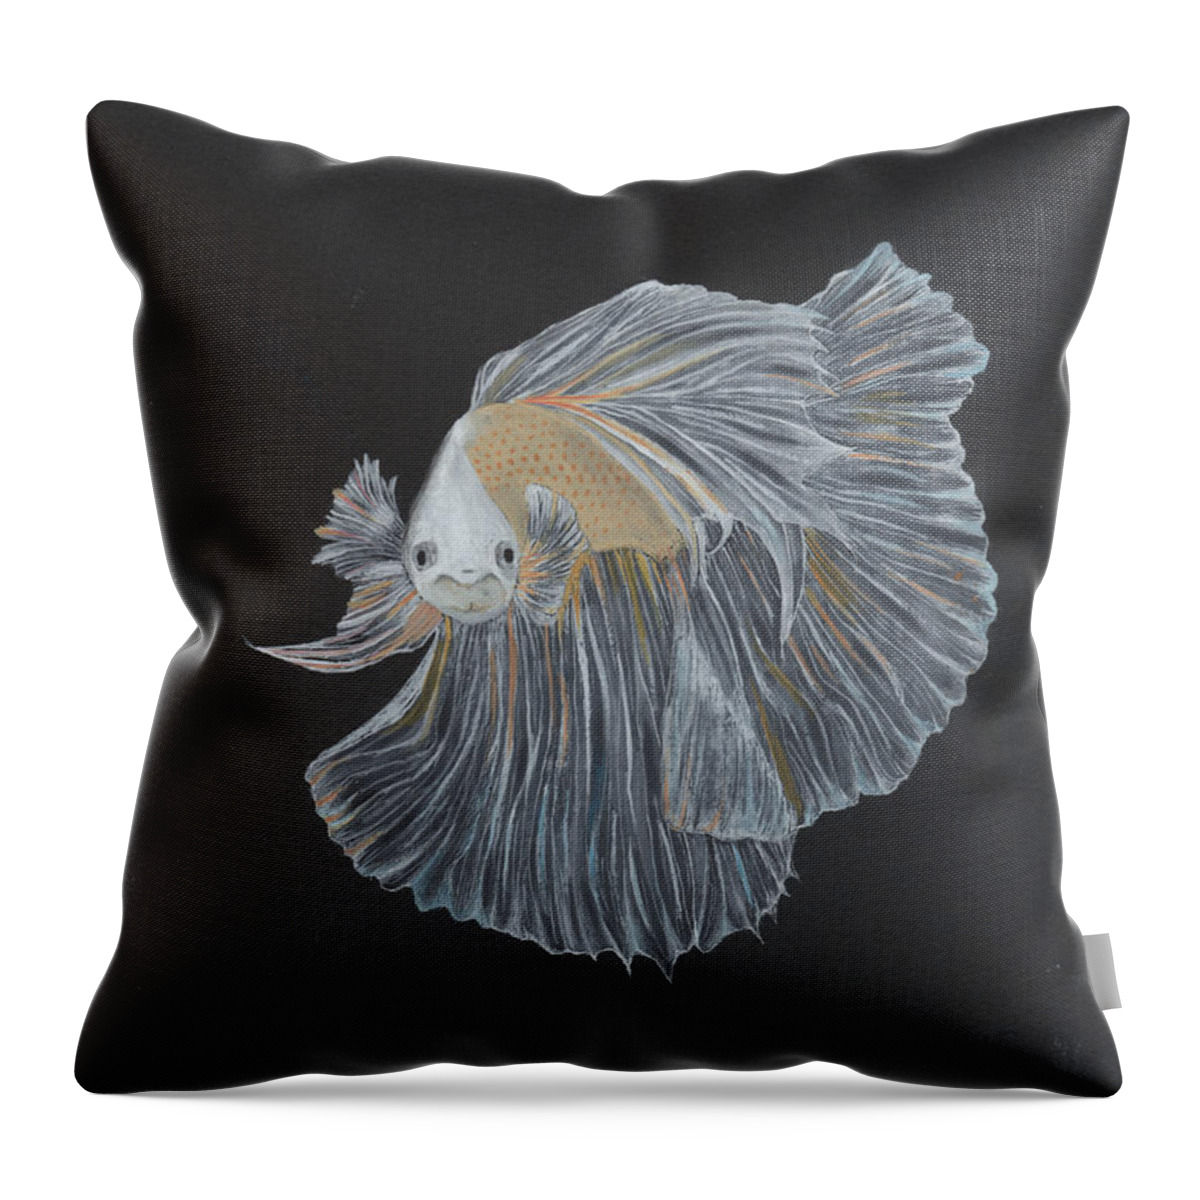 Fighting Fish Throw Pillow featuring the painting Fighting Fish by Bob Labno